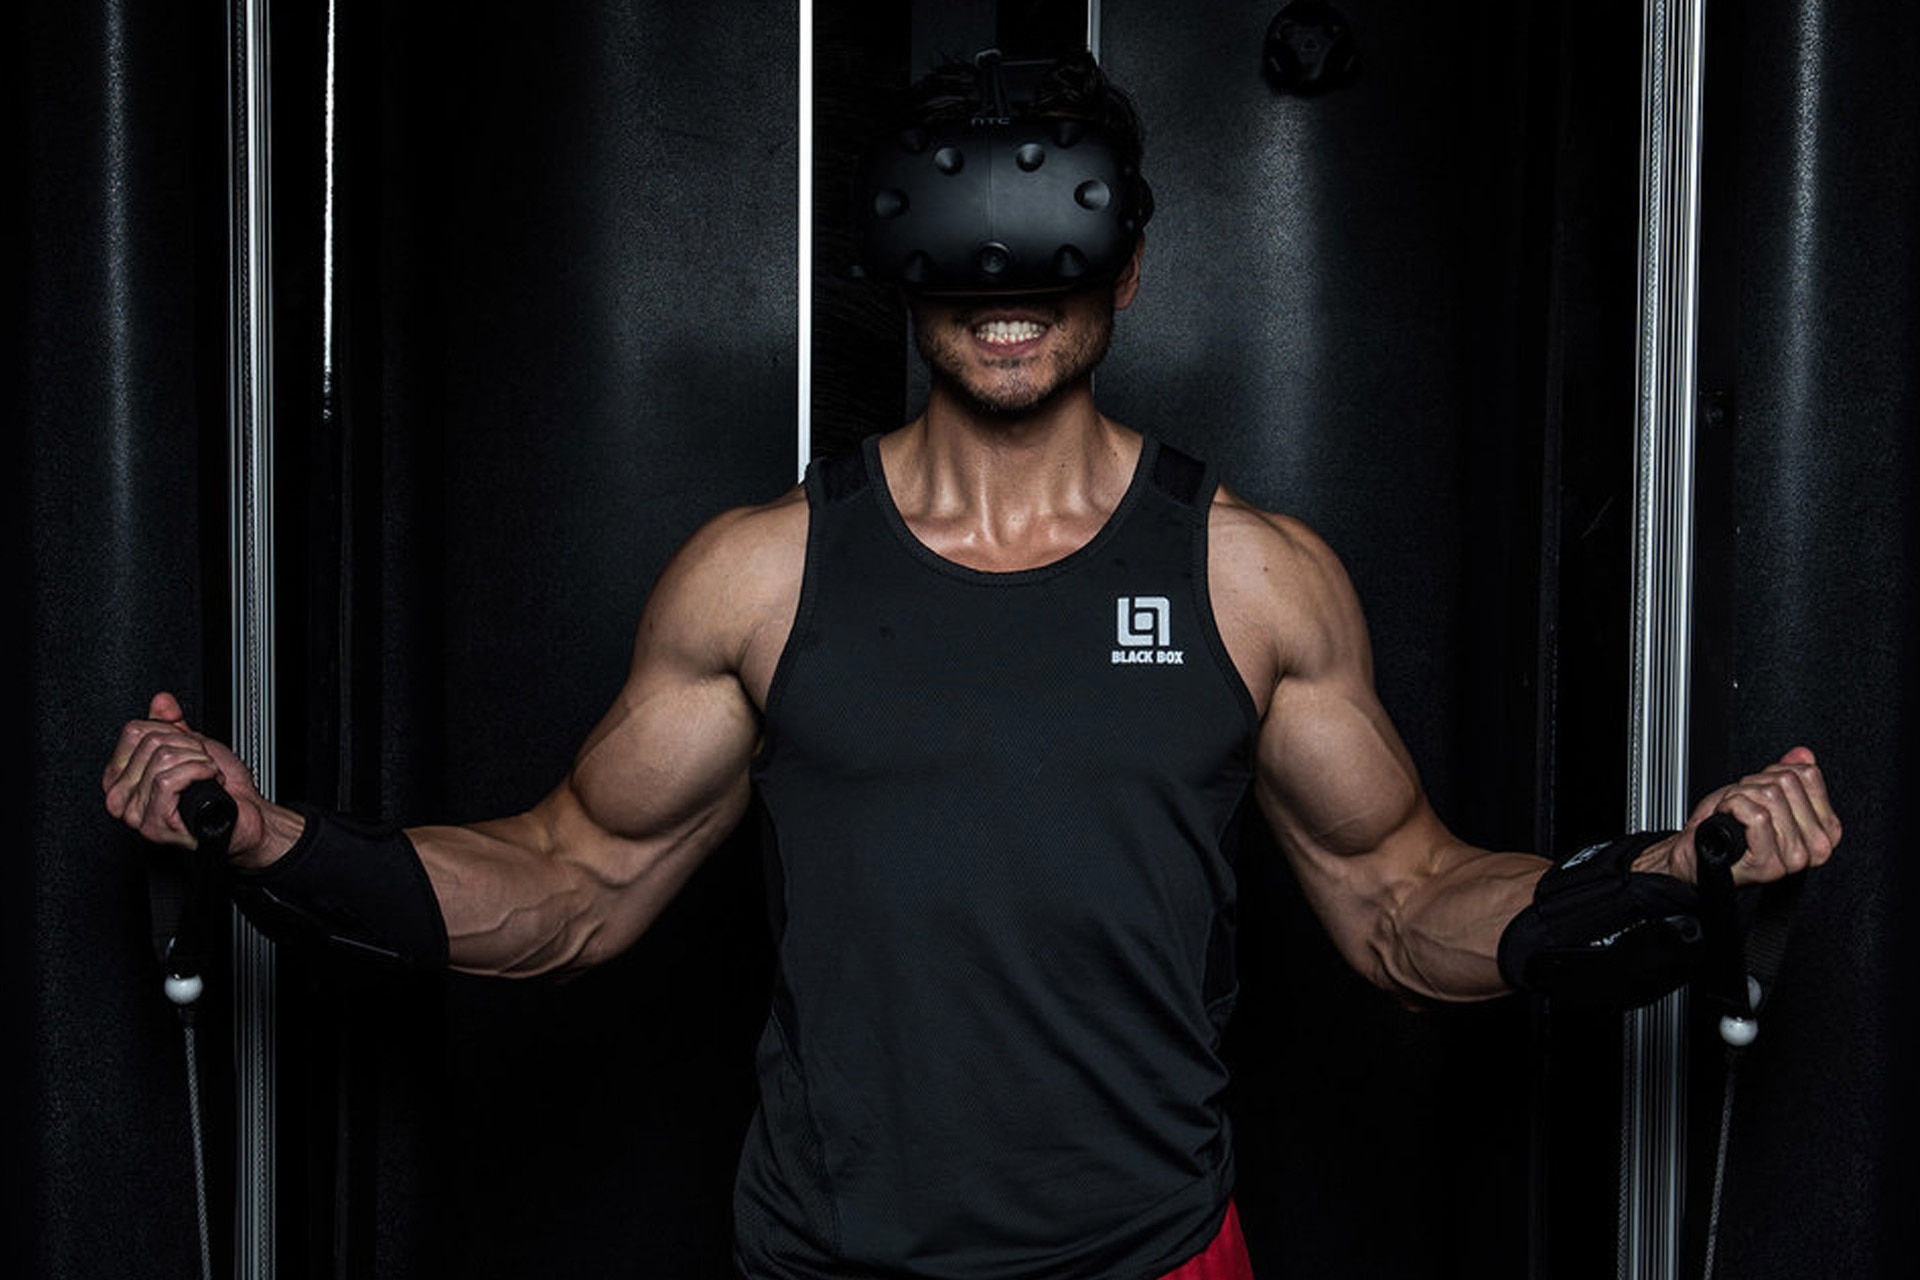 vr headset workout